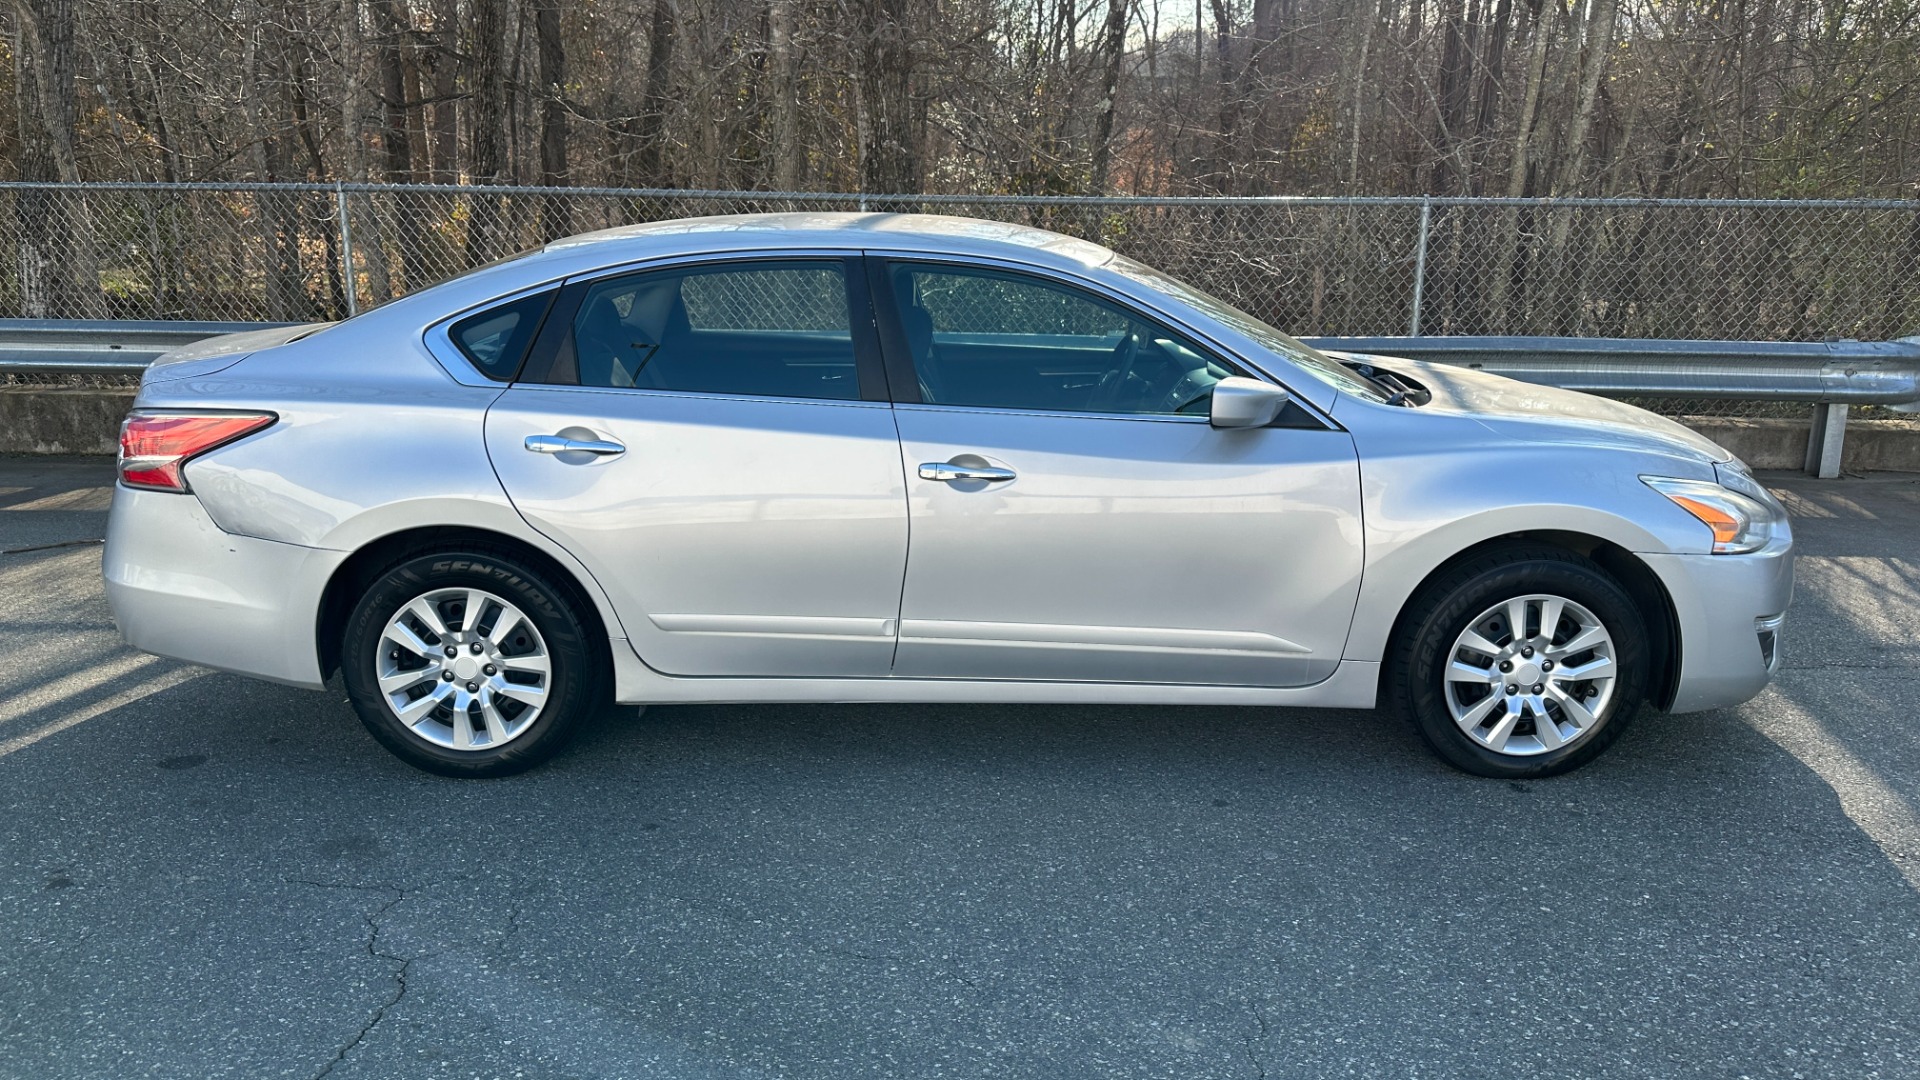 Used 2014 Nissan Altima 2.5 S / CLOTH / 4CYL / BODY SIDE MOLDING / RADIO for sale Sold at Formula Imports in Charlotte NC 28227 5